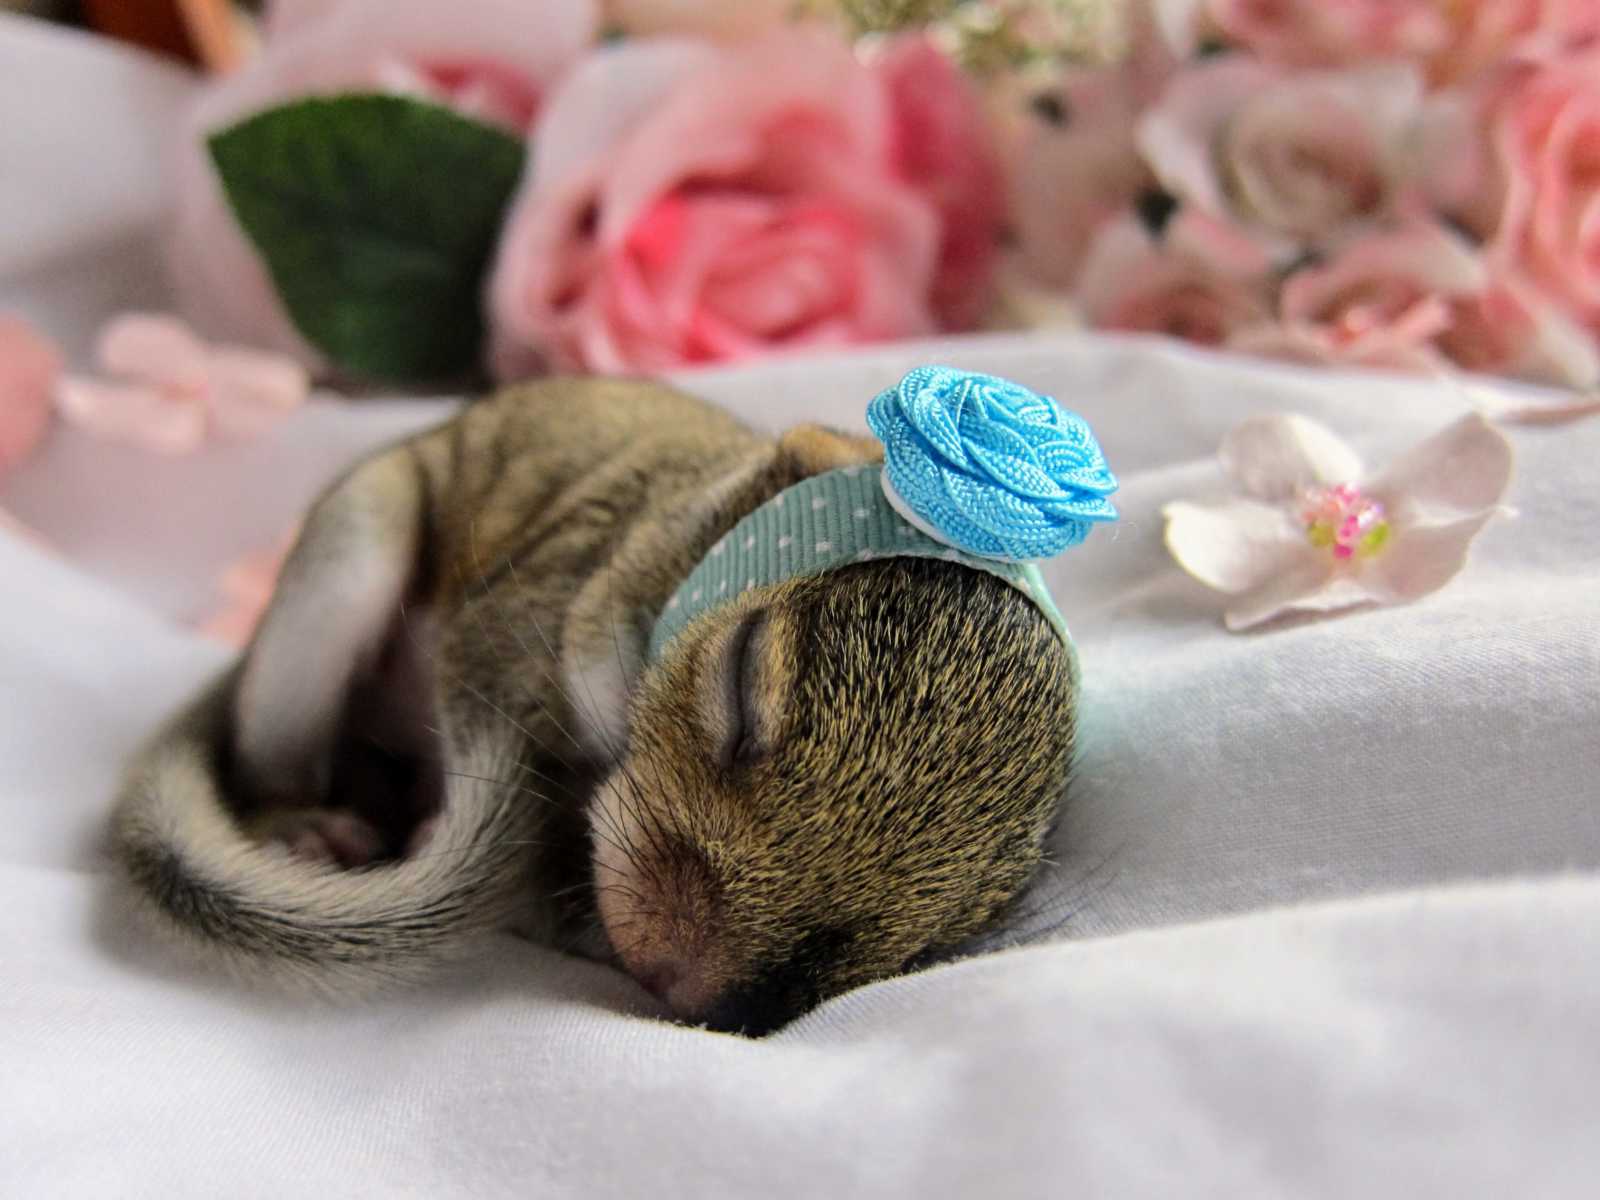 baby squirrel is sleeping on white blanket with blue polka dot headband with rose and pink roses in background